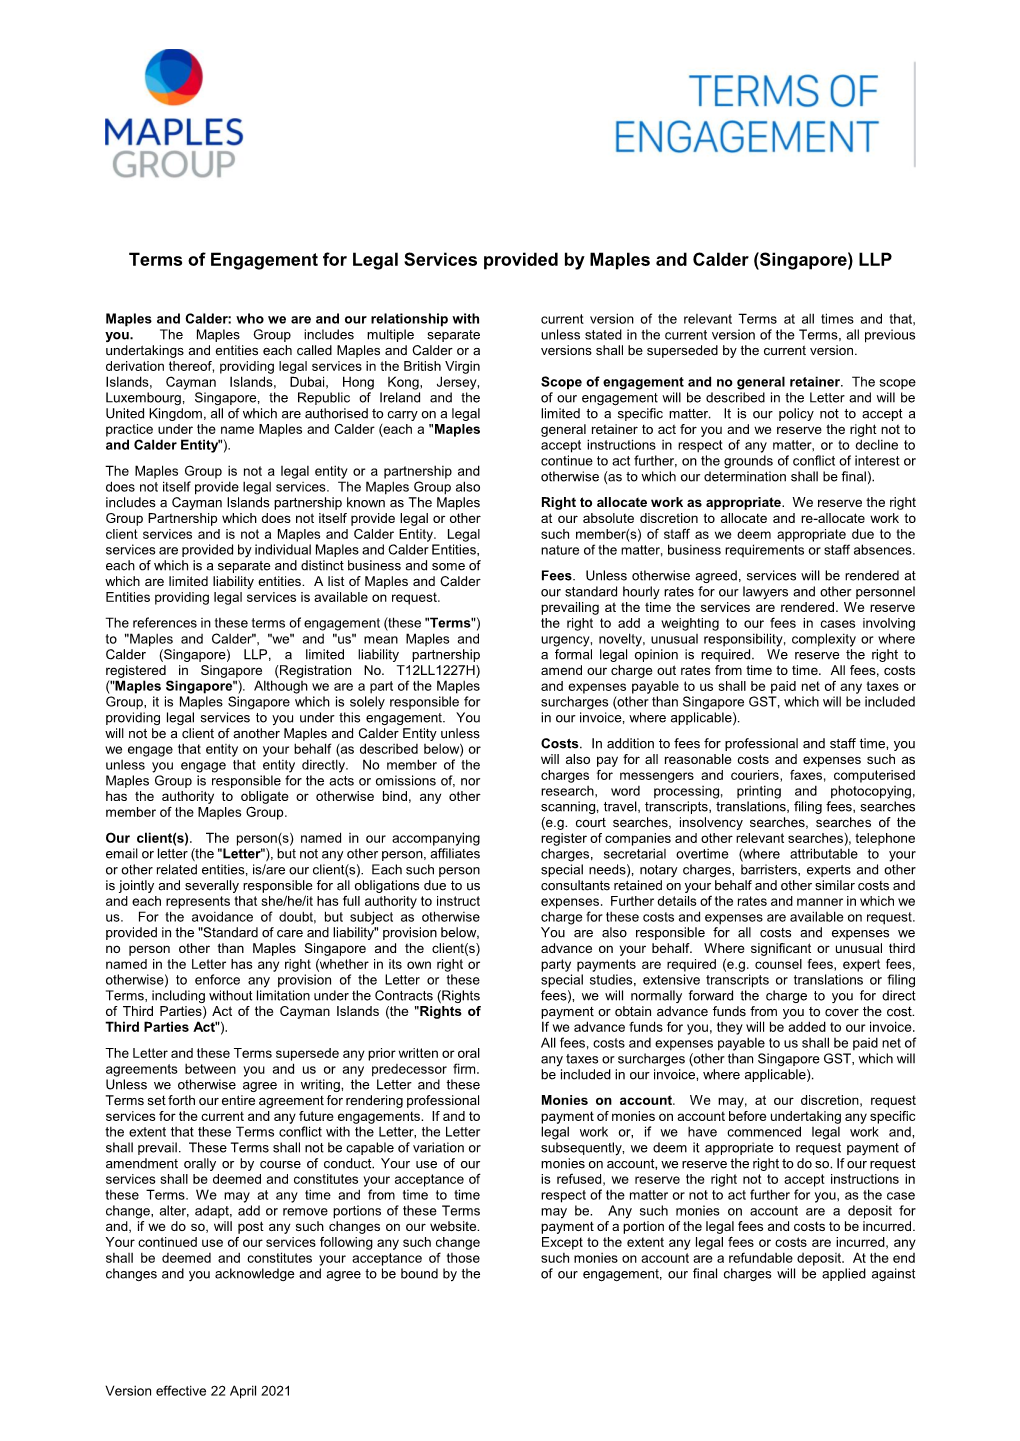 Terms of Engagement for Legal Services Provided by Maples and Calder (Singapore) LLP